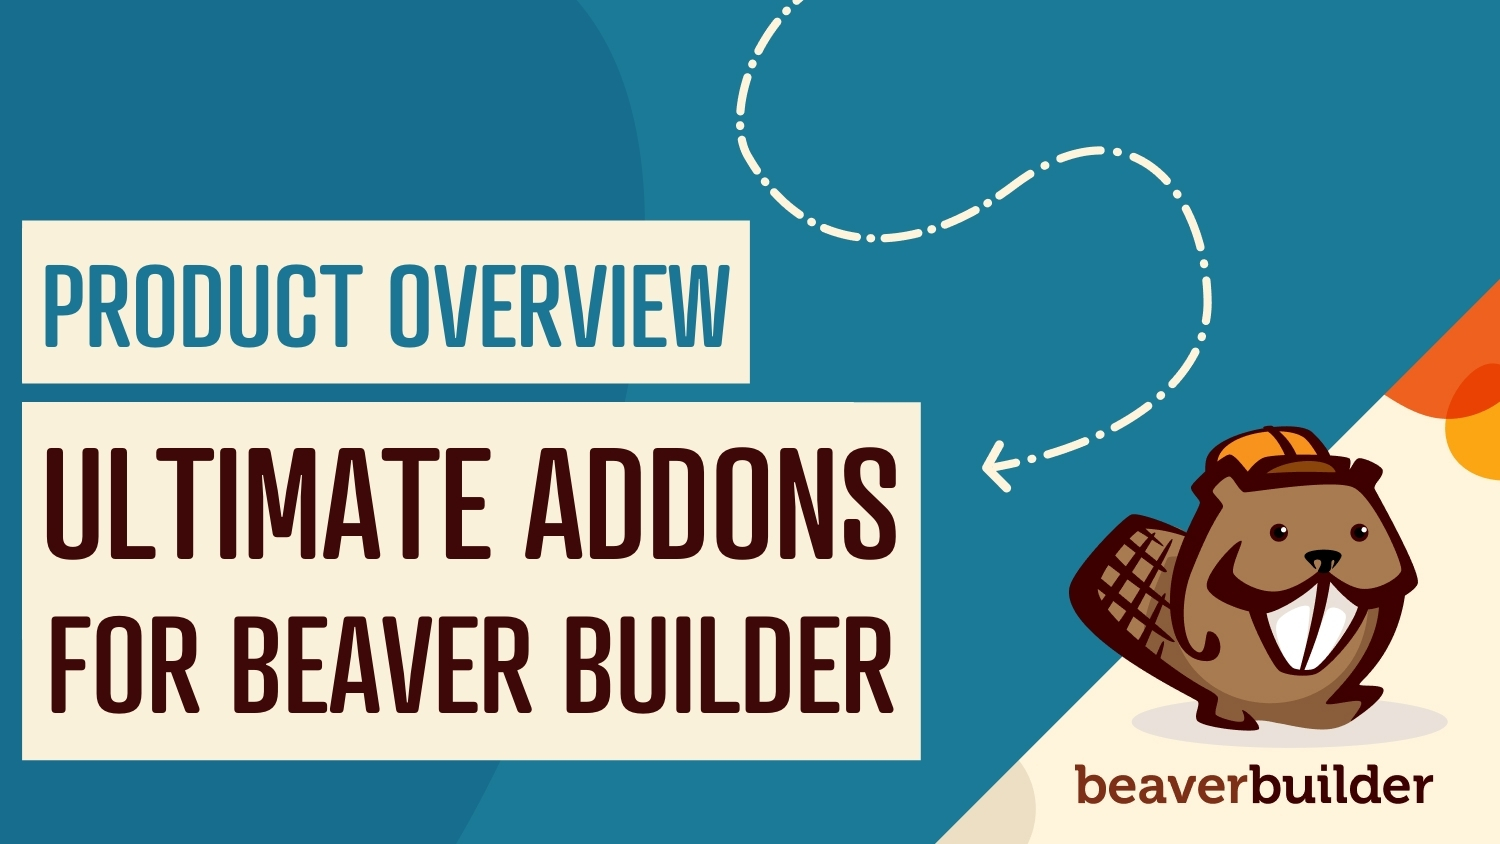 Ultimate Addons for Beaver Builder An Introduction and Review